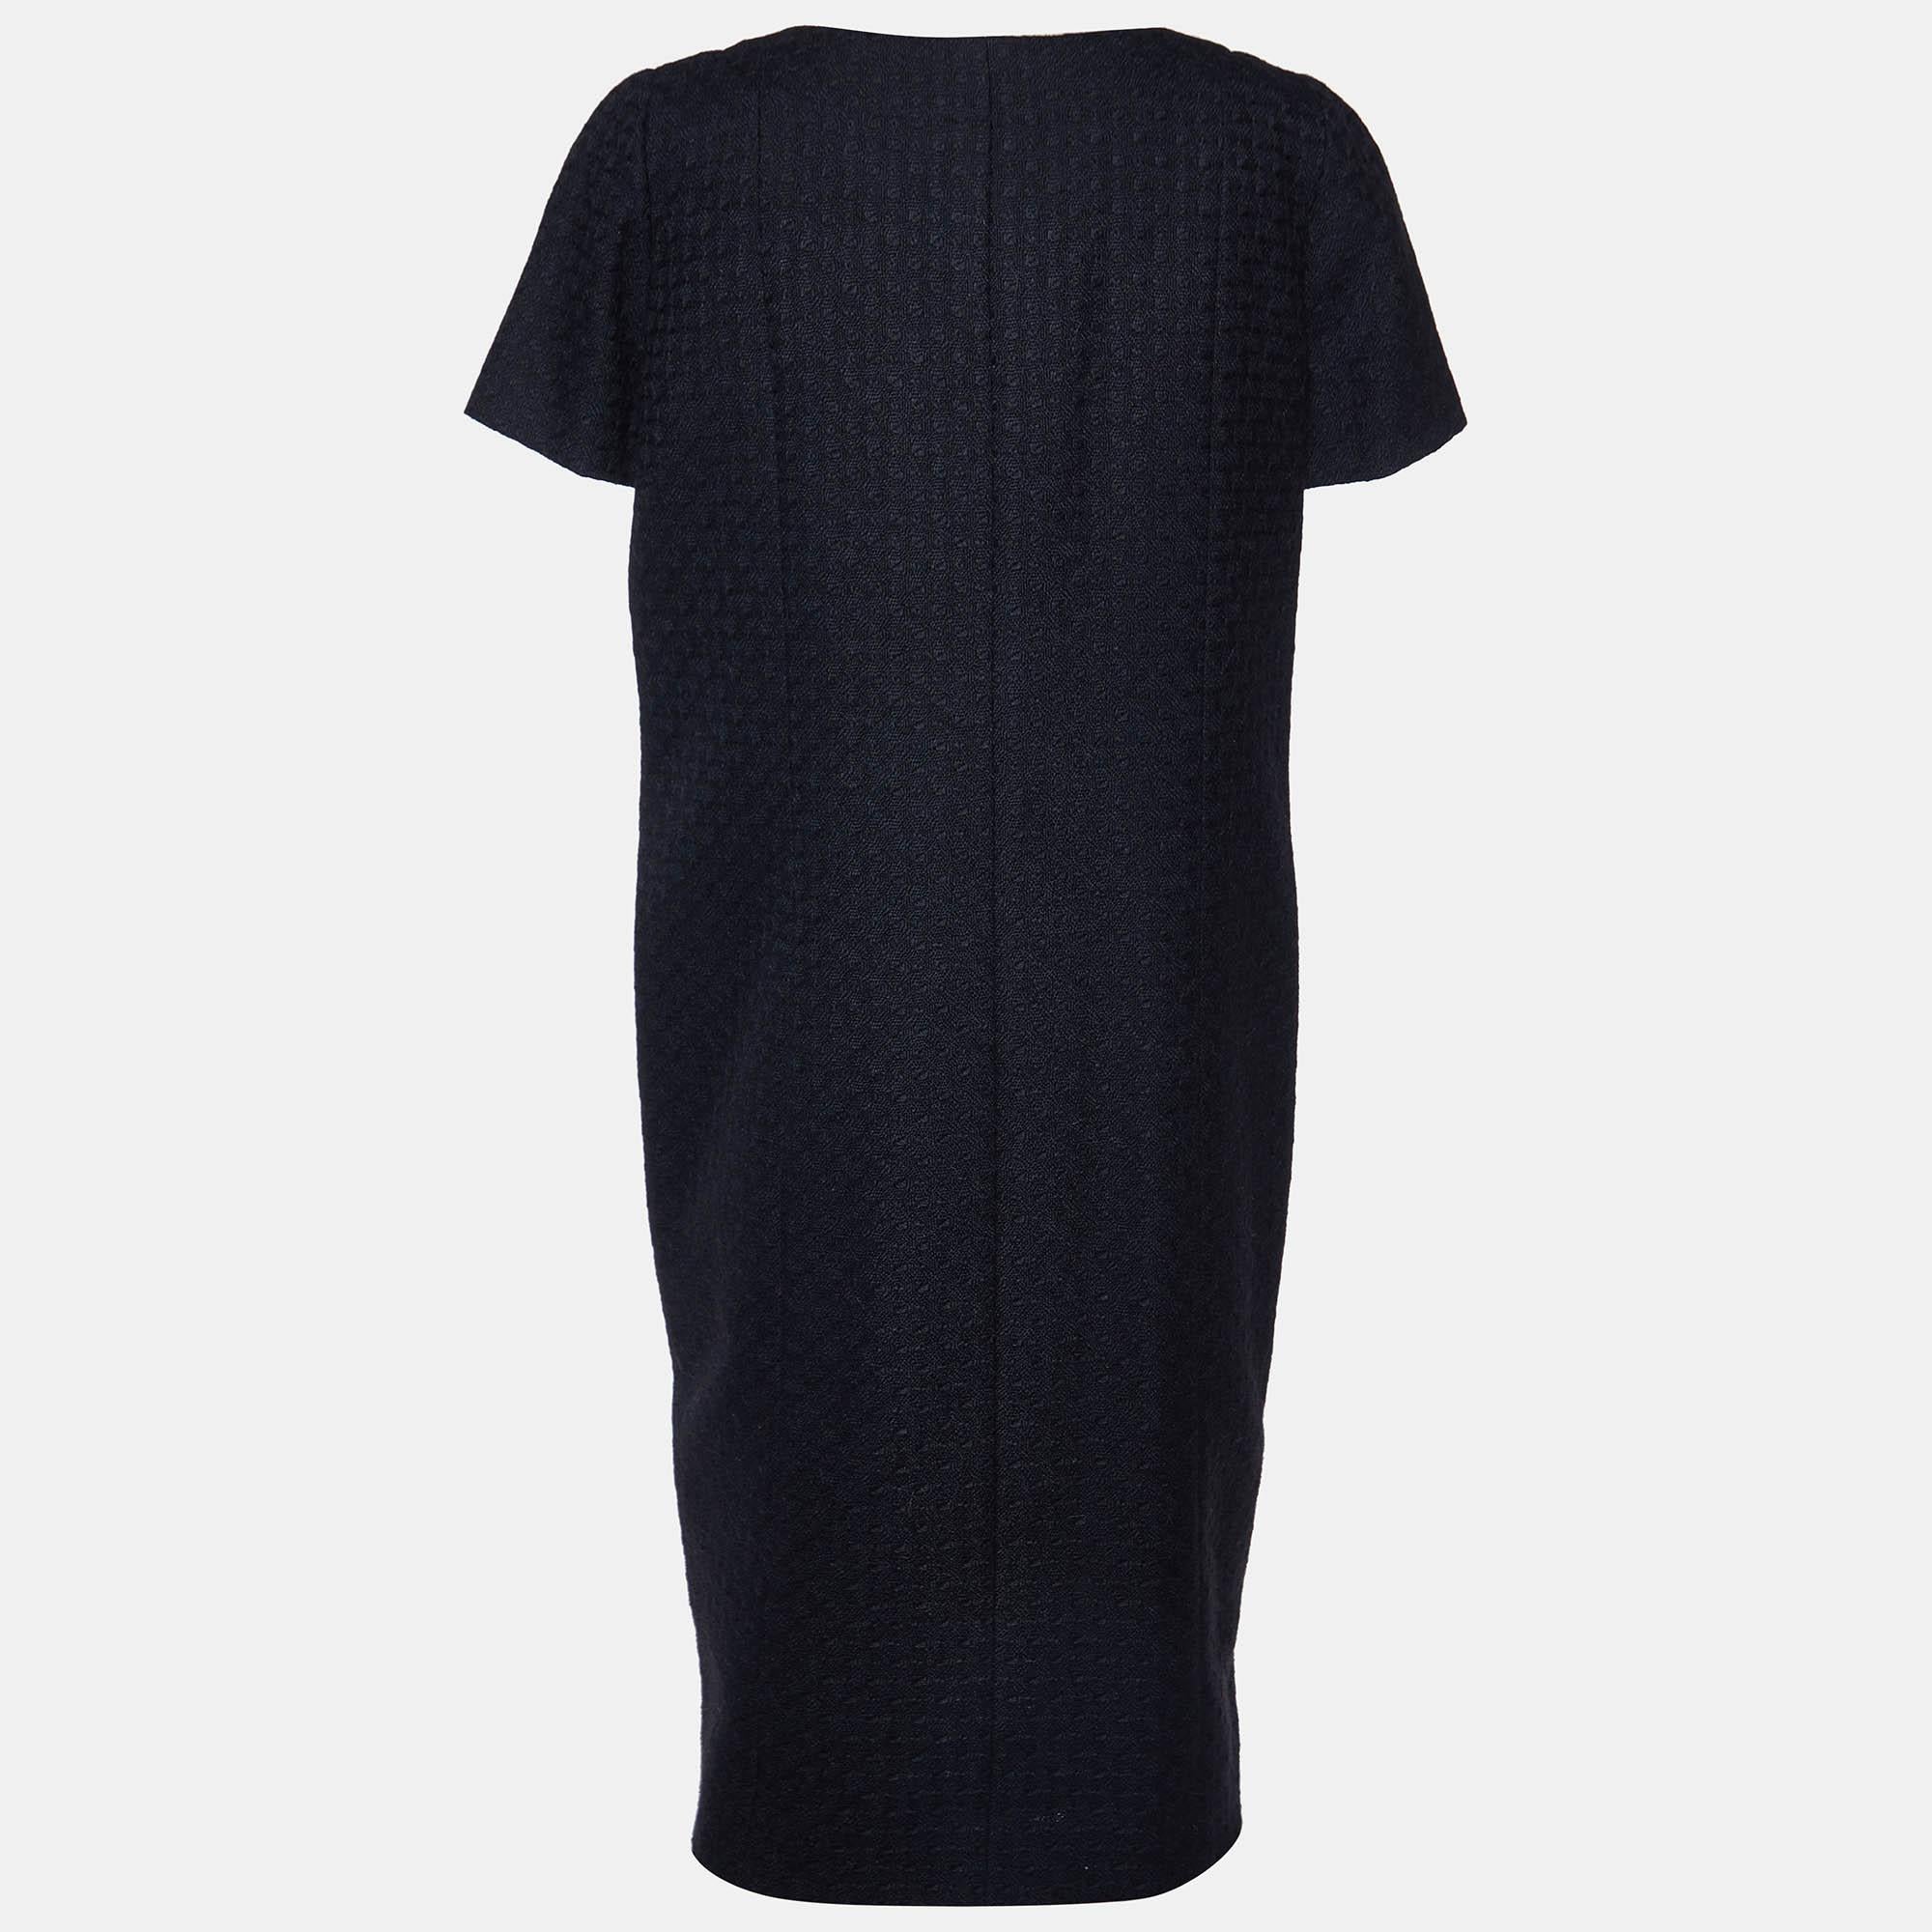 Crafted with precision, the Chanel dress exudes timeless refinement. Its sleek silhouette effortlessly contours the body, while the blend of alpaca and wool offers luxurious warmth. With understated elegance, it embodies sophistication for any